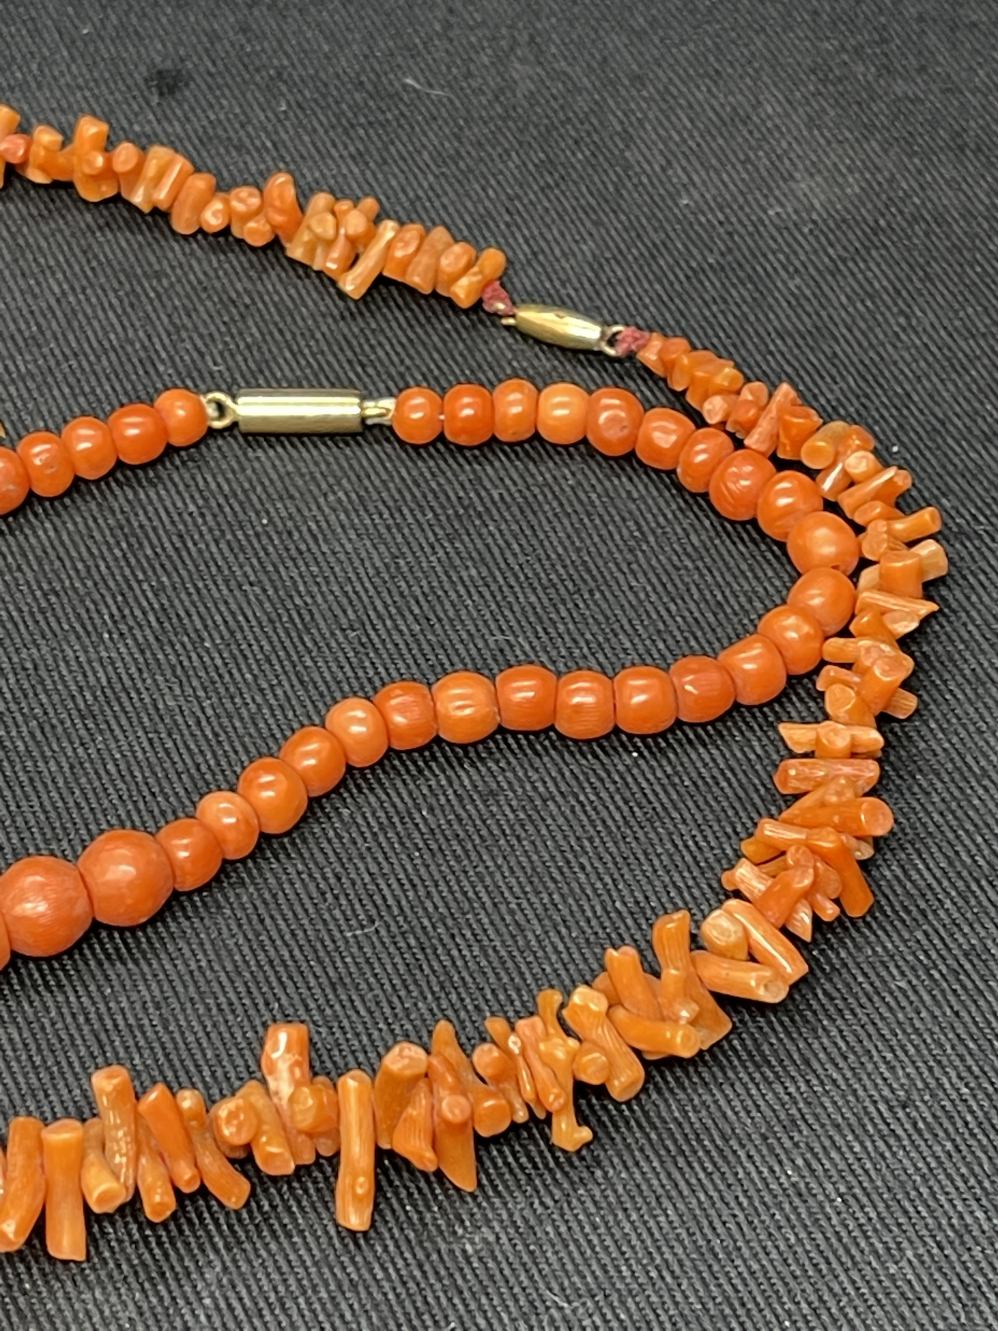 Jewellery: Necklets two coral, one bead and one branch style, plus one bracelet. - Image 3 of 3